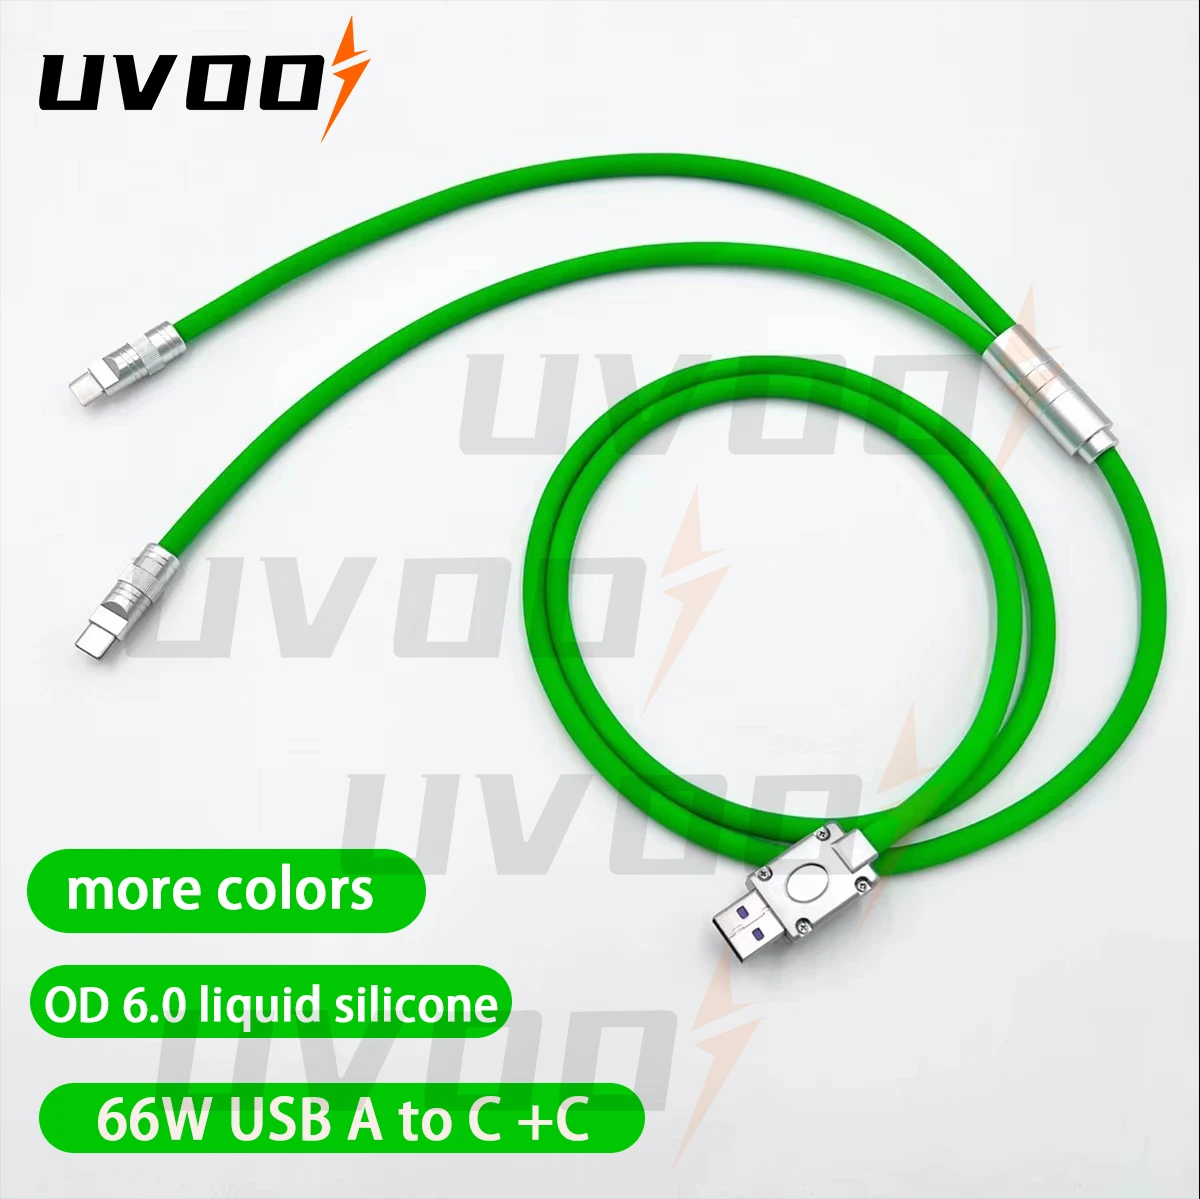 

UVOOI Max 66W Fast Charging Cable DIY 2 in 1 Liquid Silicone USB A to Dual USB Type C Data Transfer Cable For Xiaomi HUAWEI